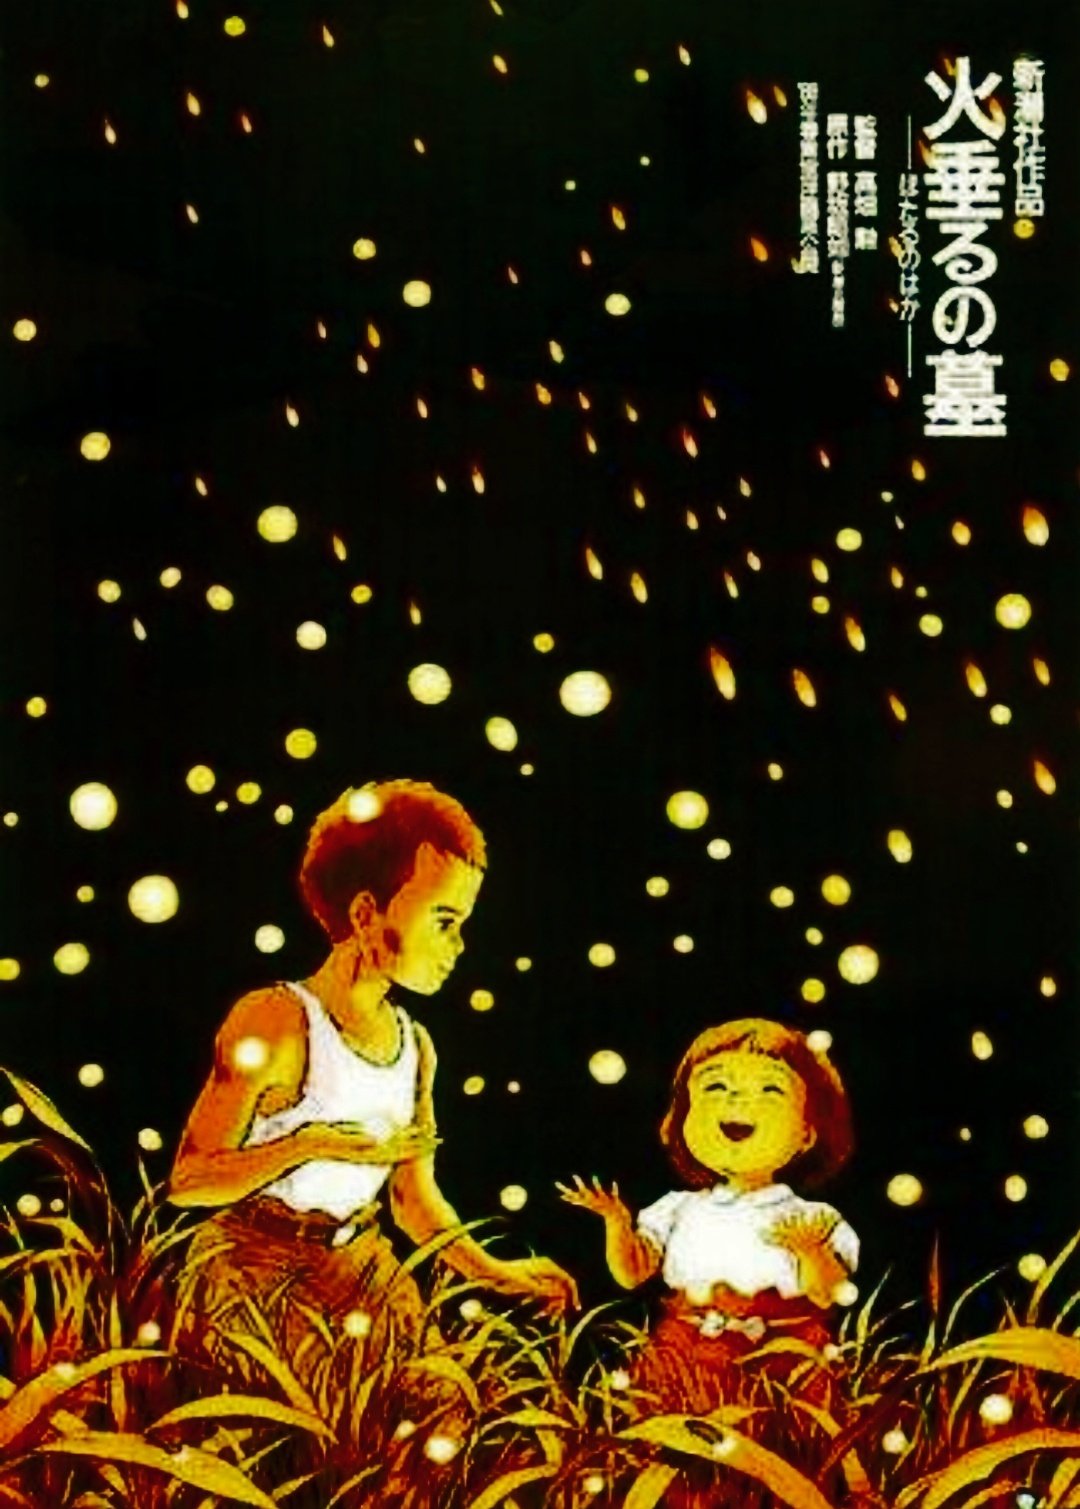 Turning the brightness all the way up on the film poster for Grave of the  Fireflies (1988) : r/interestingasfuck